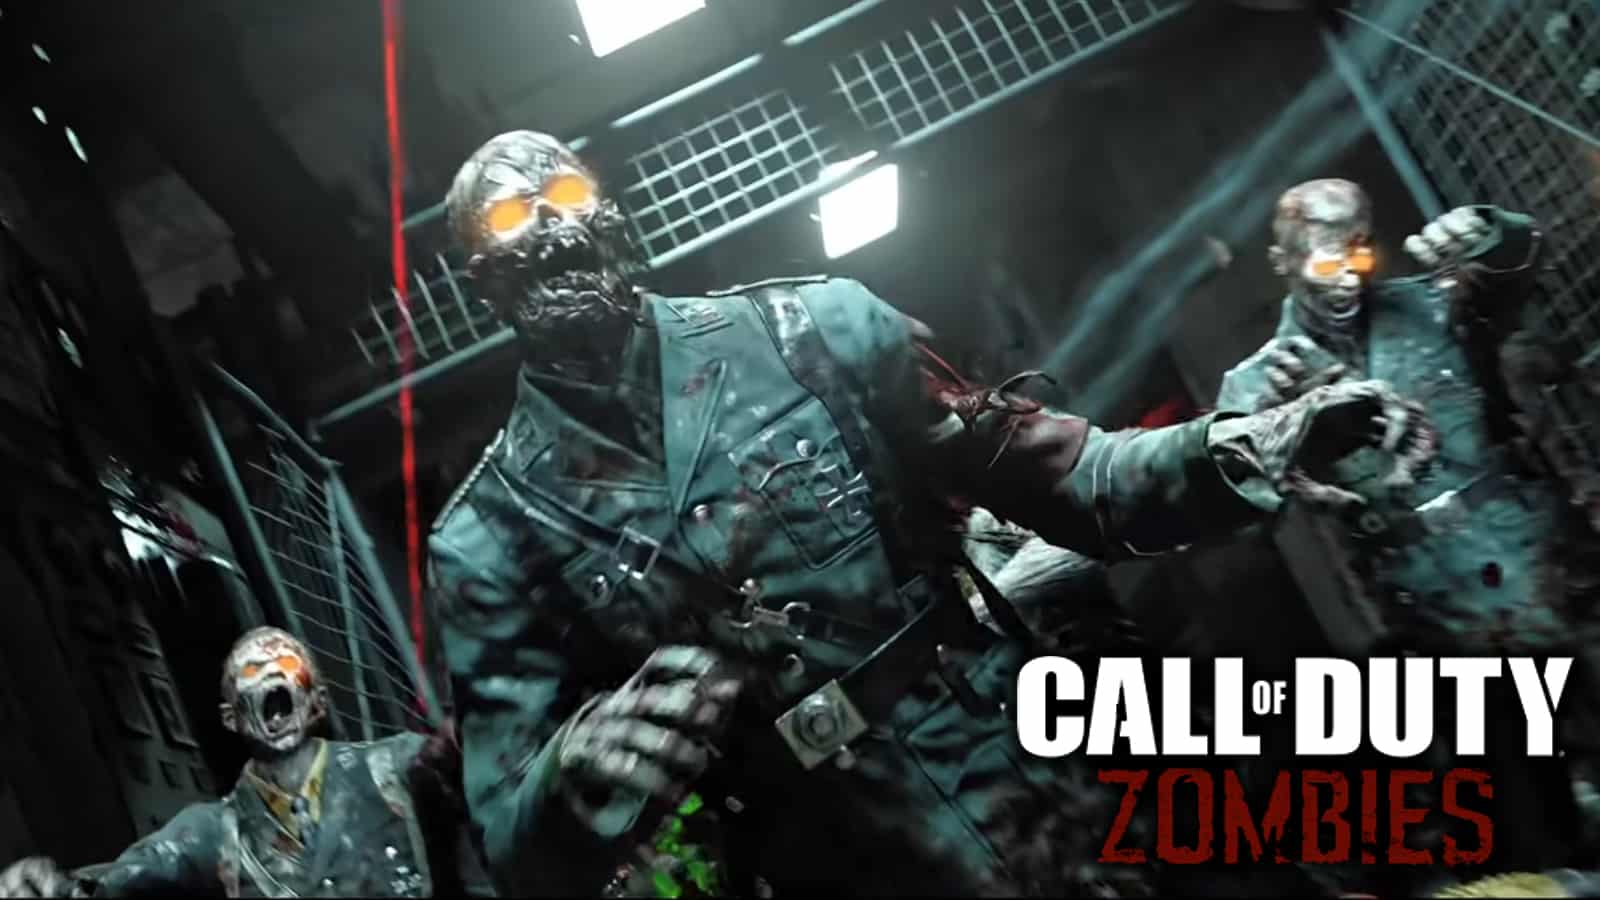 Modern Warfare 3 players divided on “boring” new Zombies mode - Dexerto